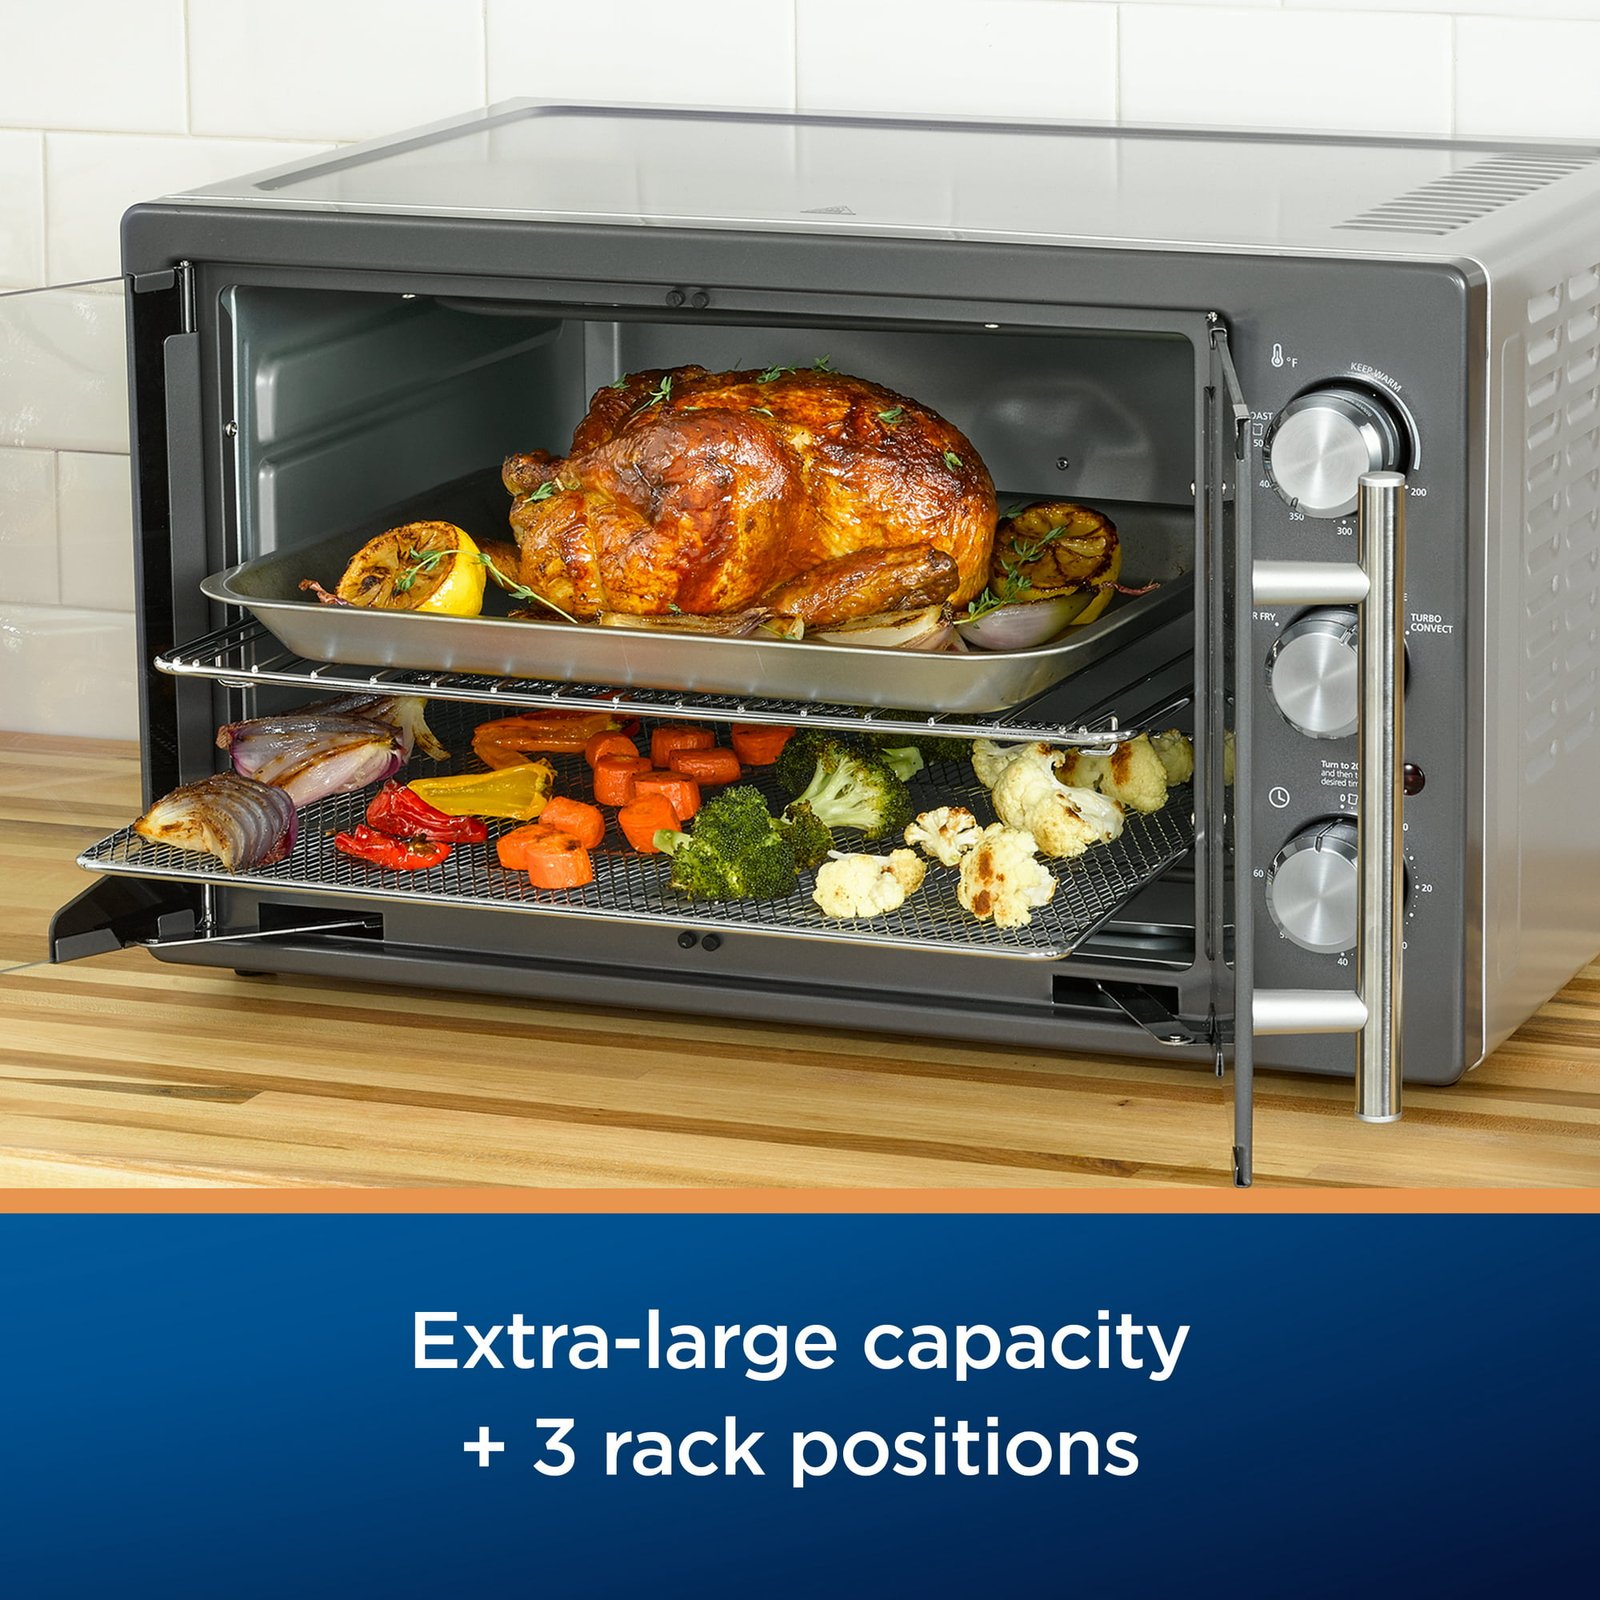 https://themarketdepot.com/wp-content/uploads/2023/01/Oster-Extra-Large-French-Door-Air-Fry-Countertop-Toaster-Oven-4.jpeg